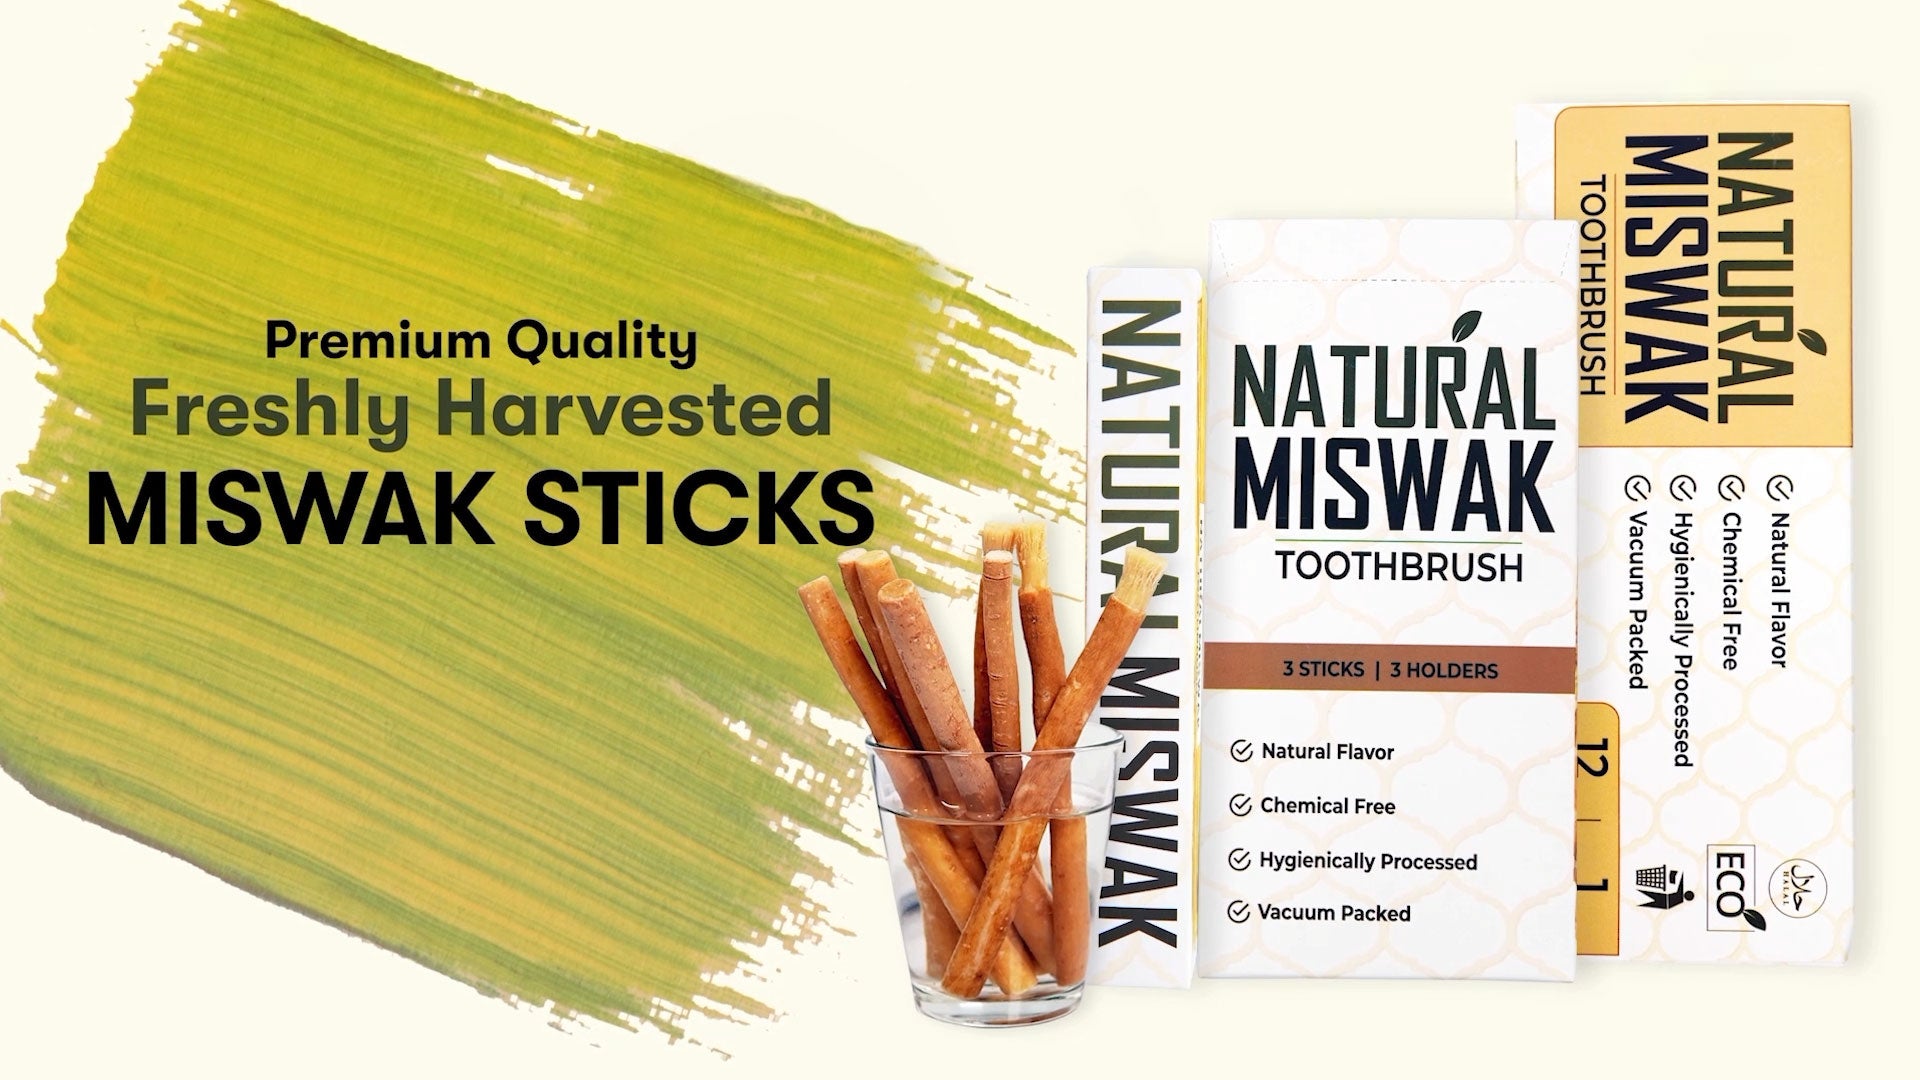 Load video: Miswak Sewak Sticks For Teeth (Traditional Natural Toothbrush)